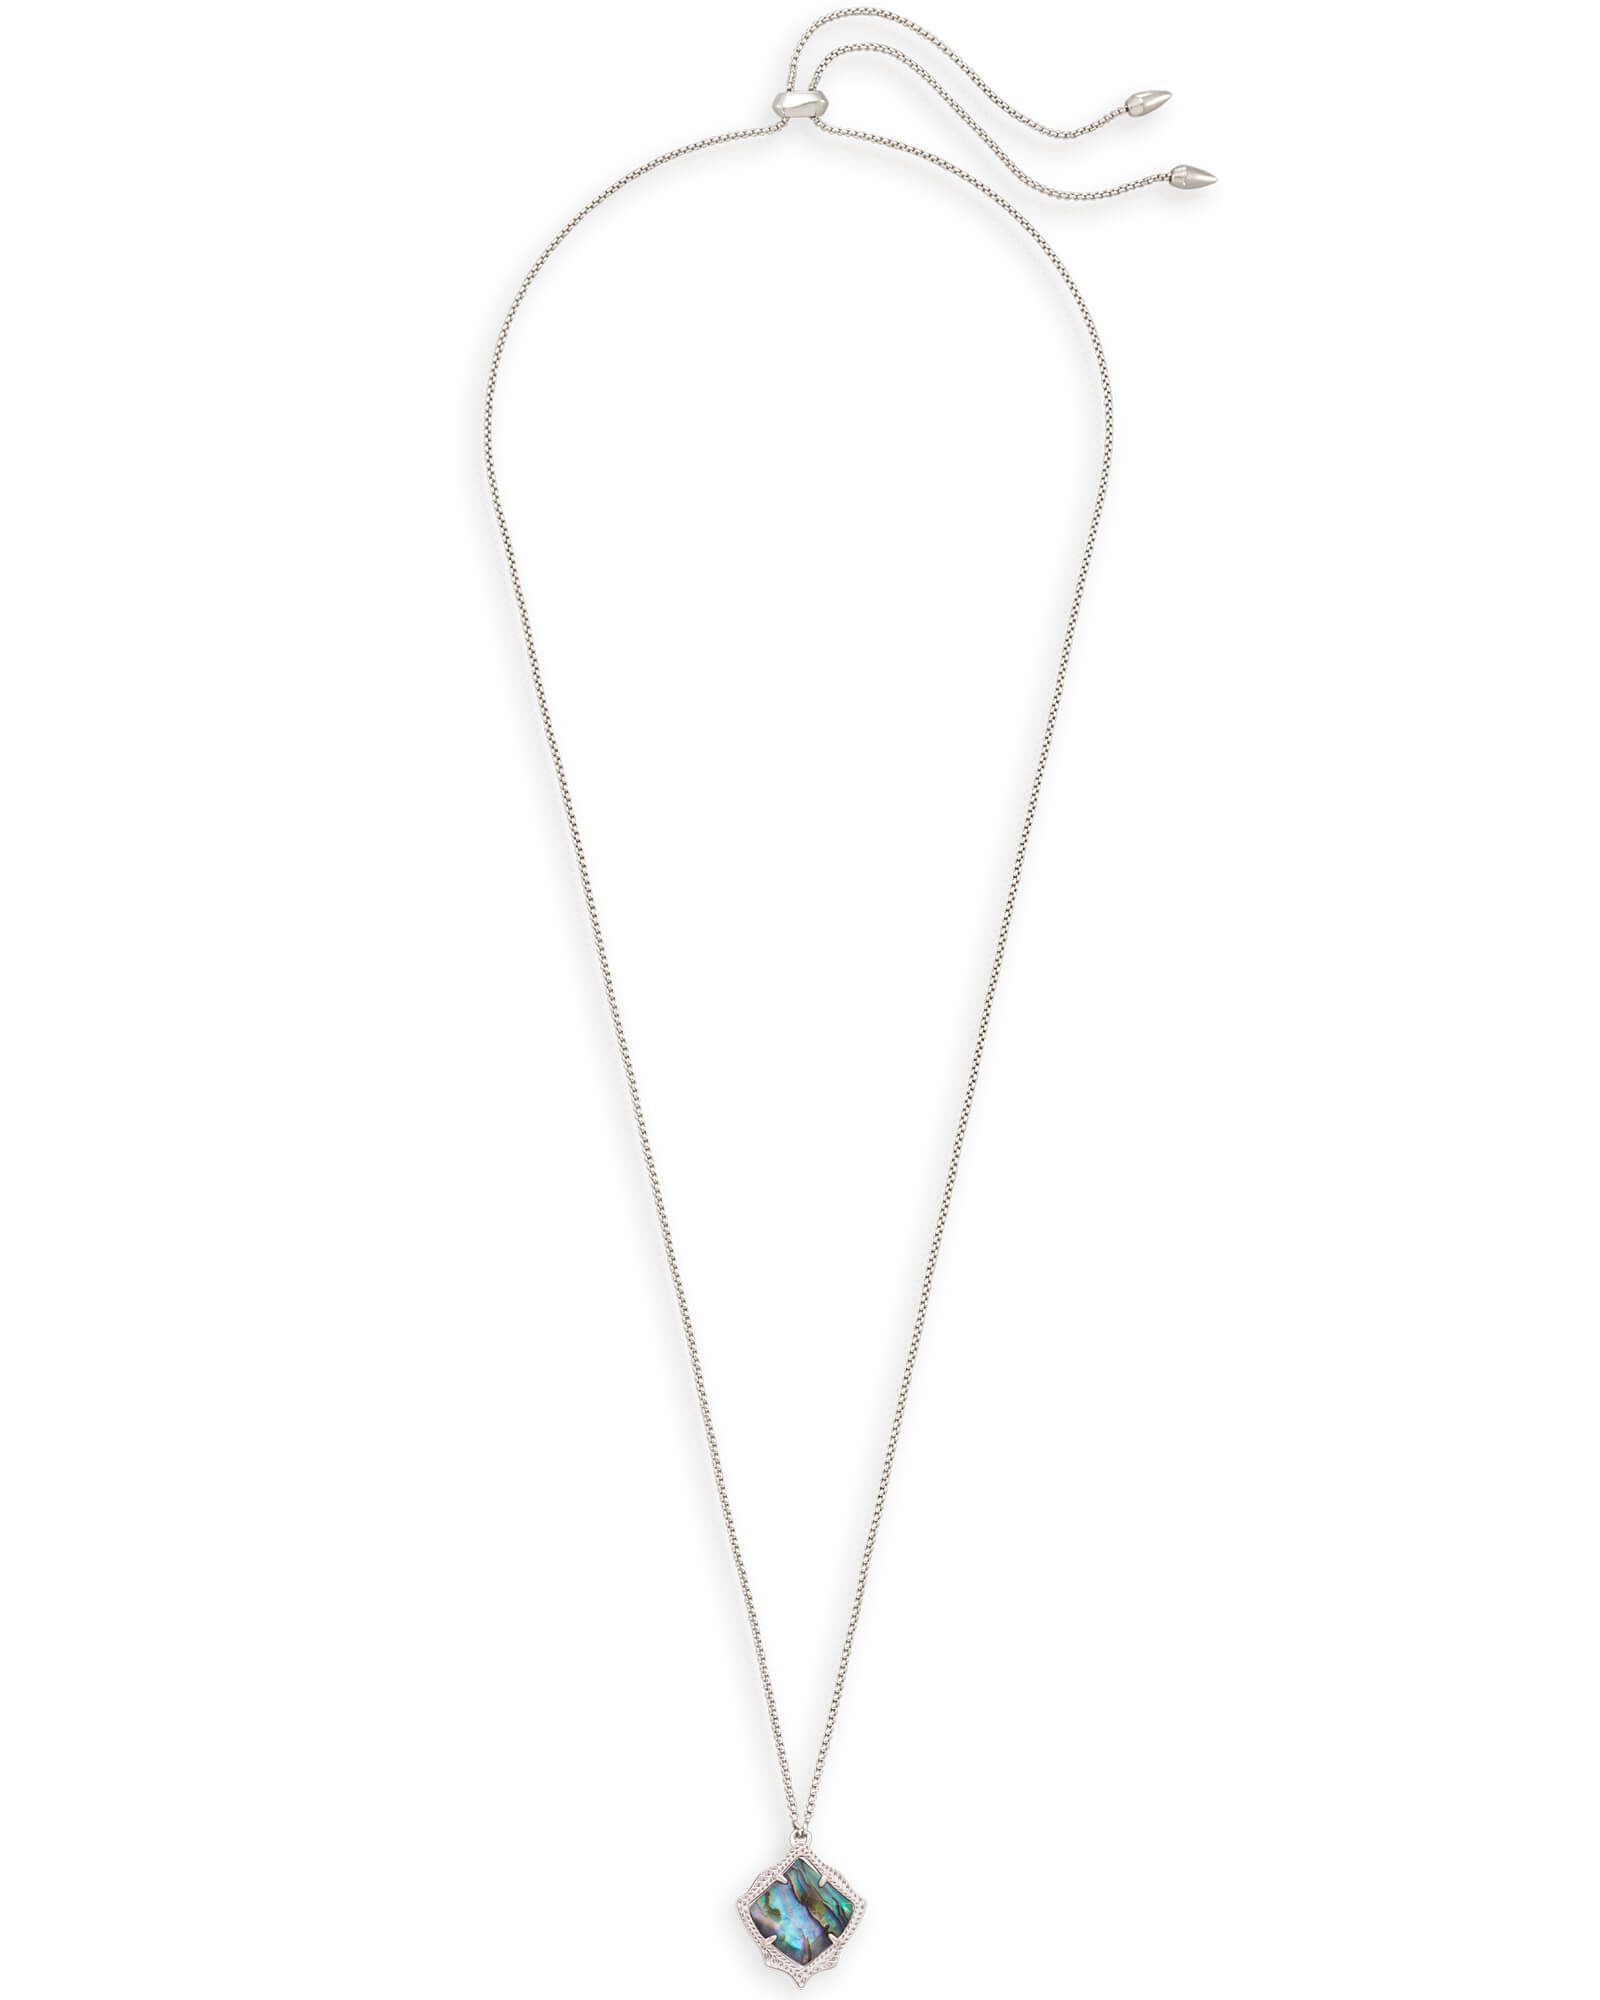 Kacey Silver Long Pendant Necklace in Abalone Shell | Kendra Scott